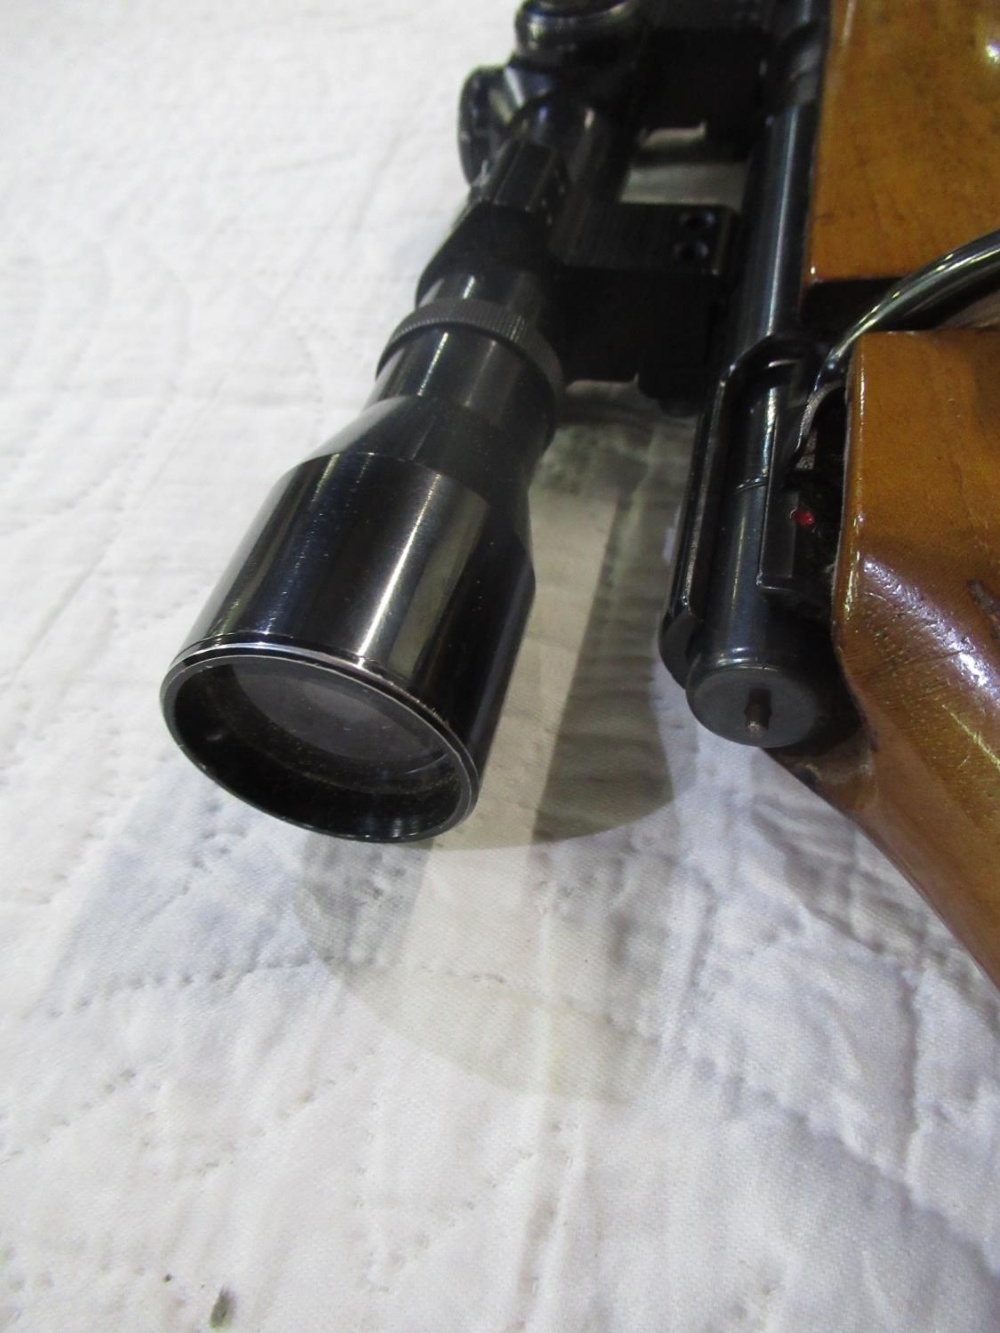 Krico .22 cal LR bolt action rifle, made in Germany with own magazine, Micro-Trac weaver - Image 3 of 3